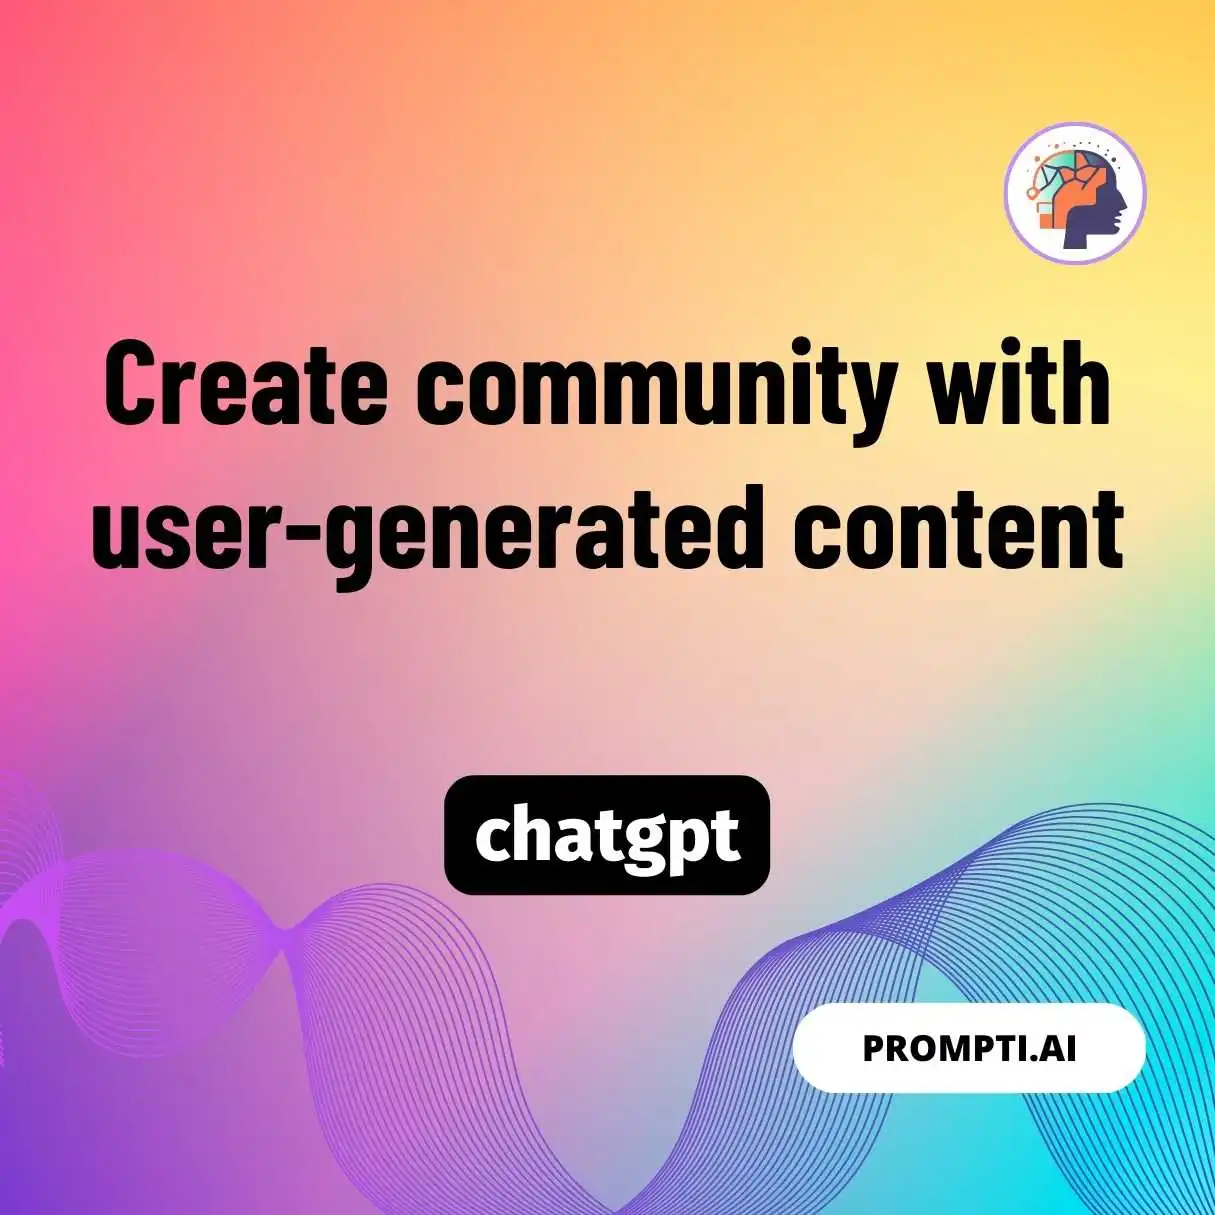 Create community with user-generated content